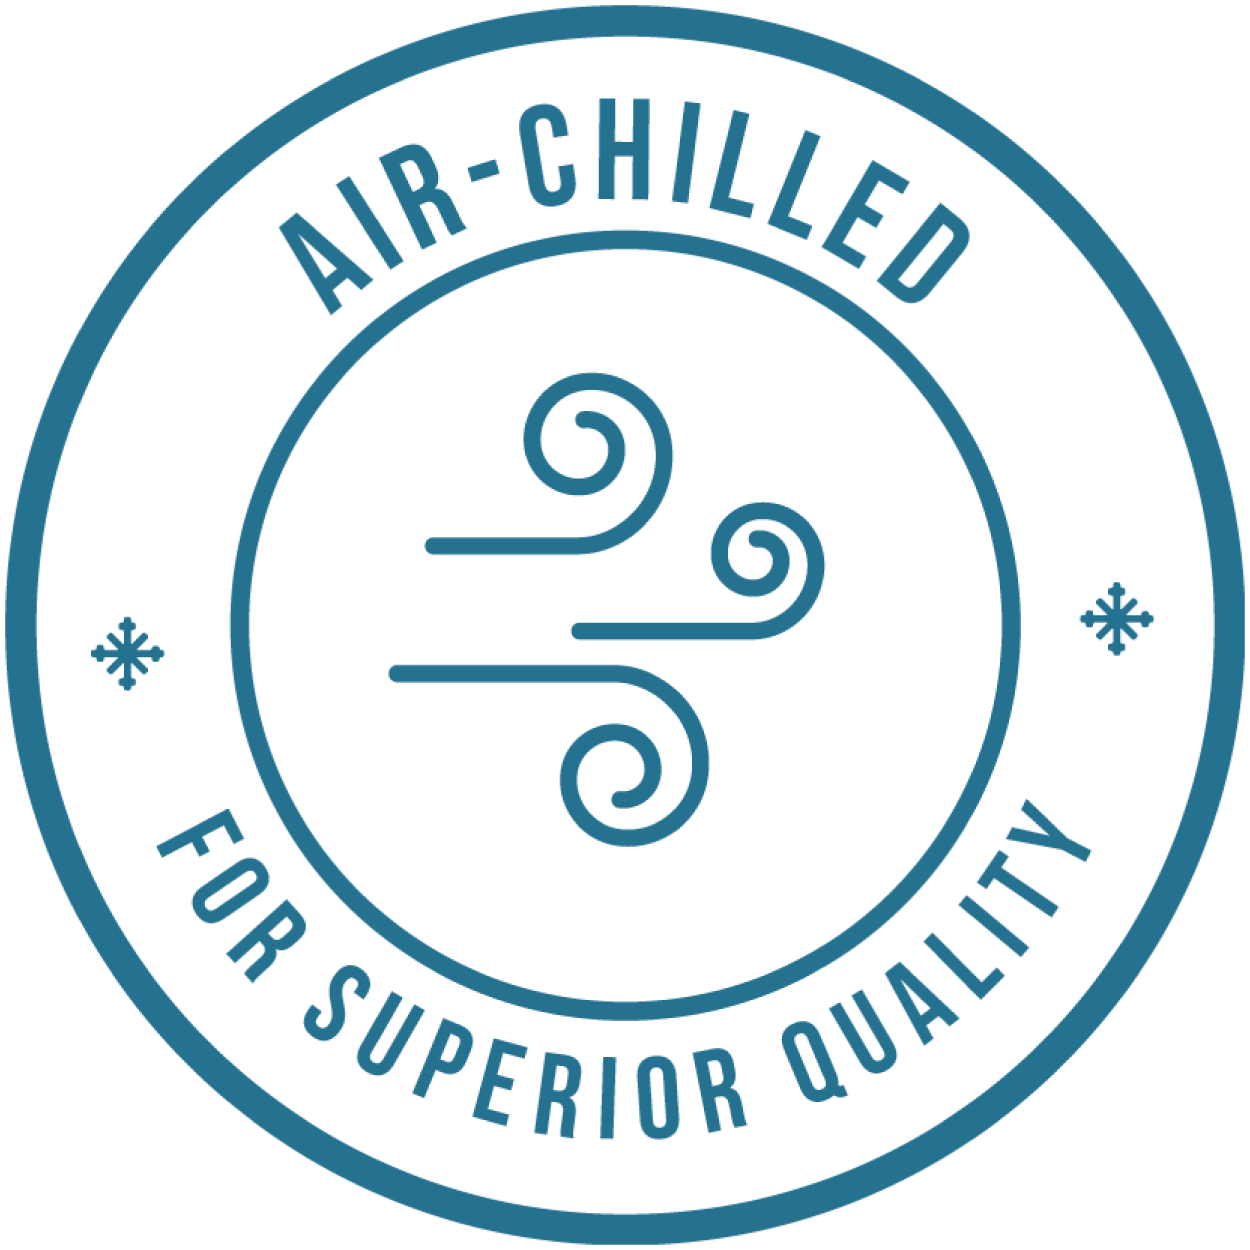 Air Chilled Icon - Air Chilled for Superior Quality